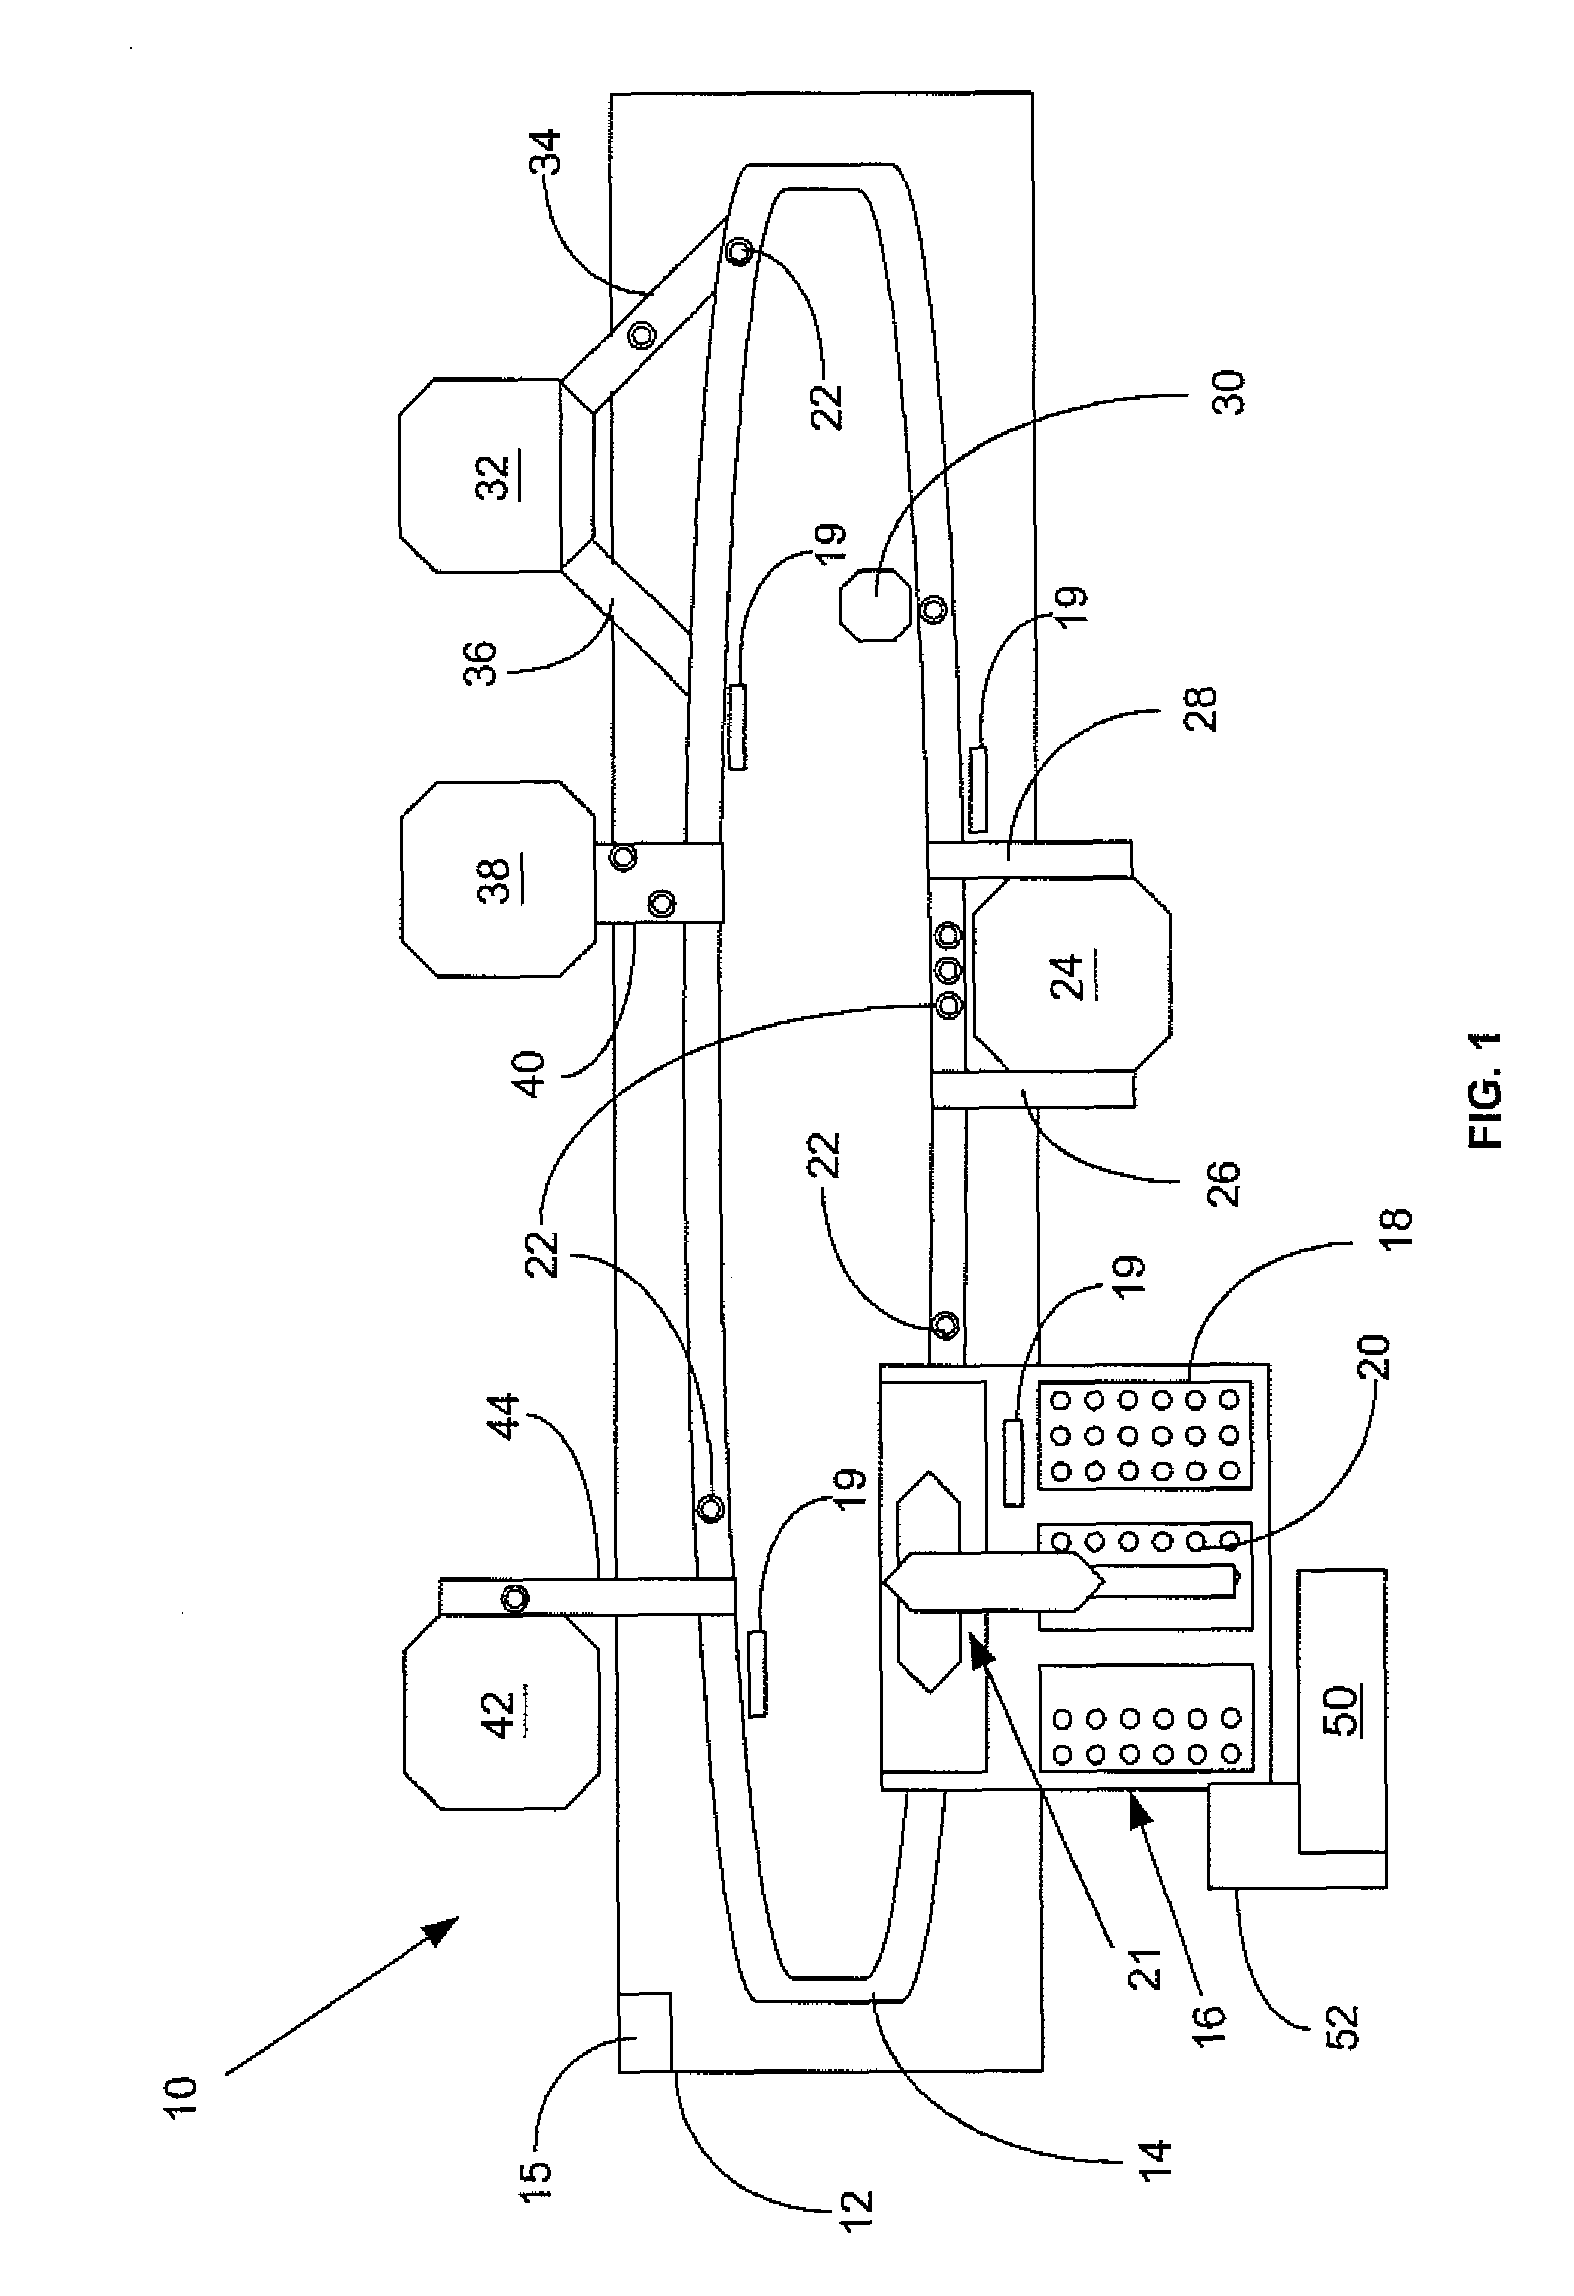 Mobile sample storage and retrieval unit for a laboratory automated sample handling worksystem